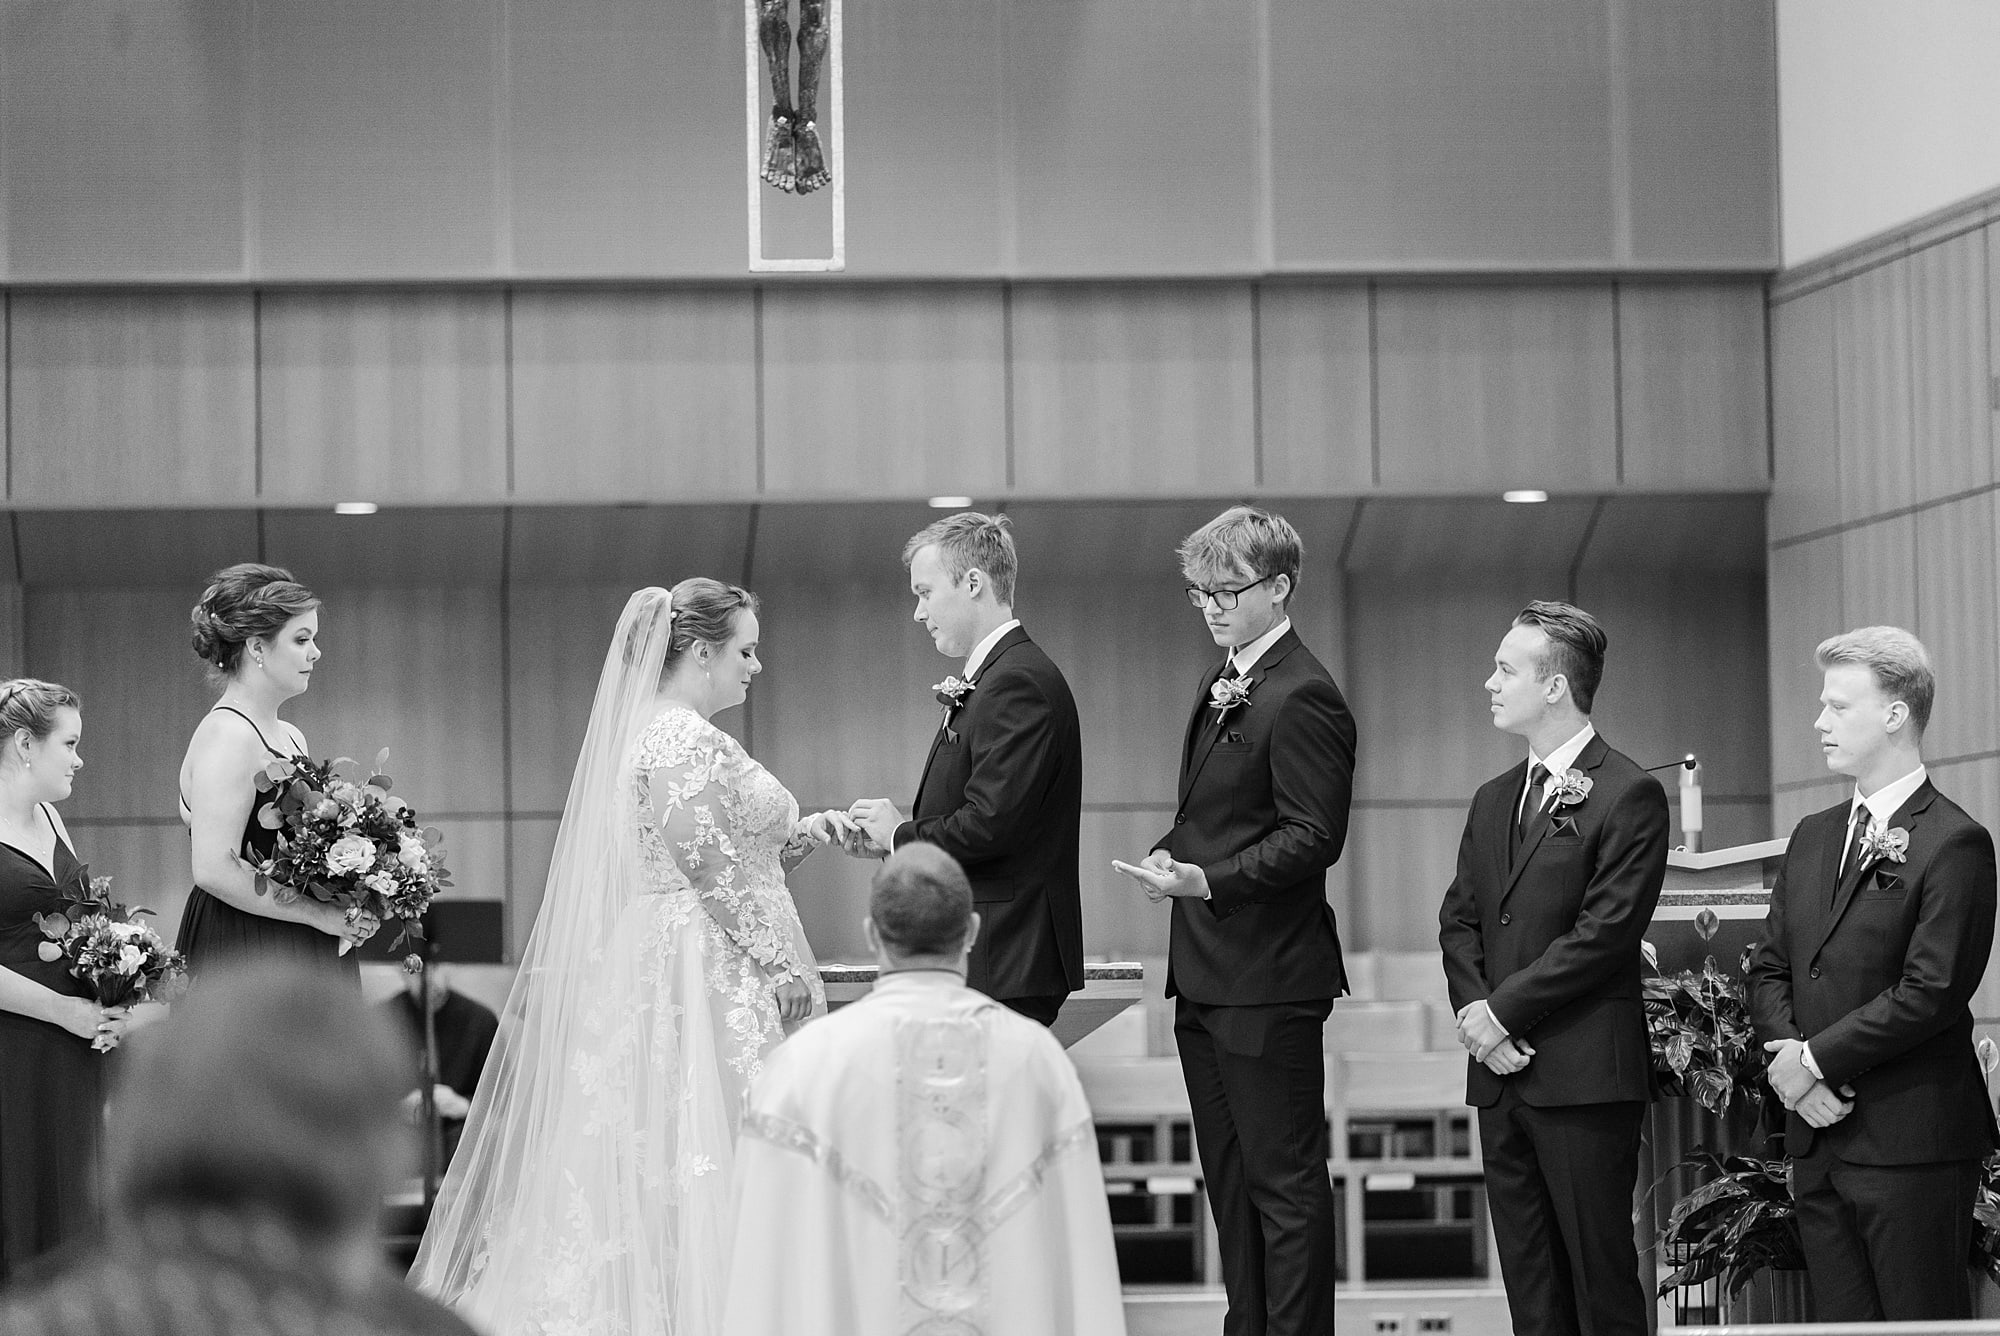 Best man hands the couple their rings at their wedding at St. Joseph's Catholic Church